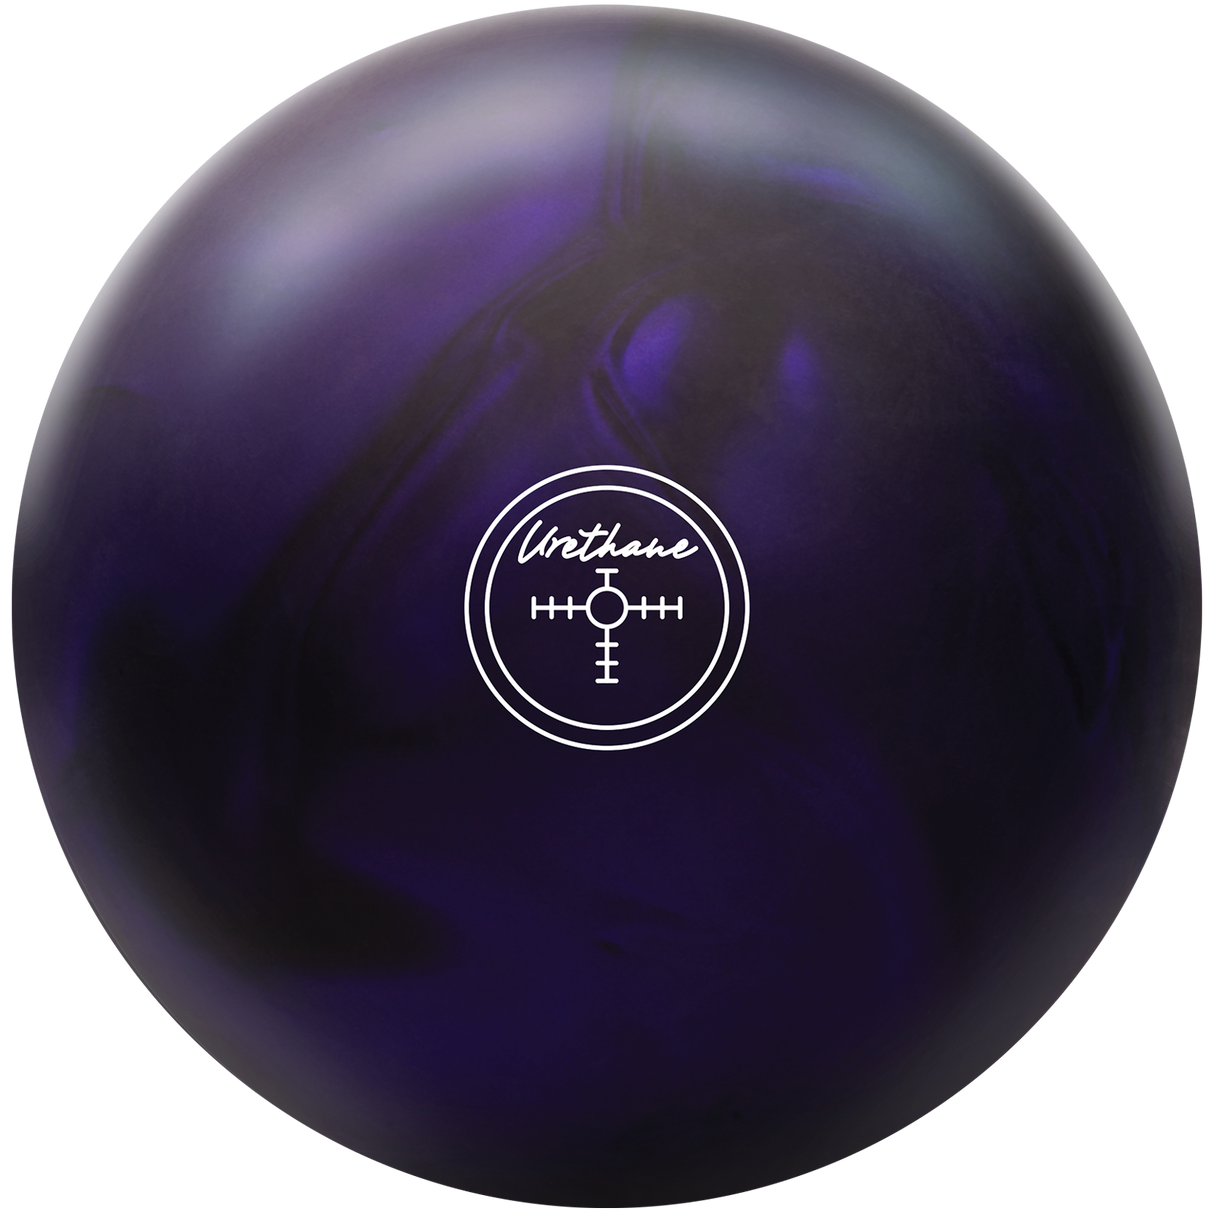 hammer-purple-pearl-urethane bowling ball. Inside Bowling powered by Ray Orf's Pro Shop in St. Louis, Missouri USA best prices online. Free shipping on orders over $75.